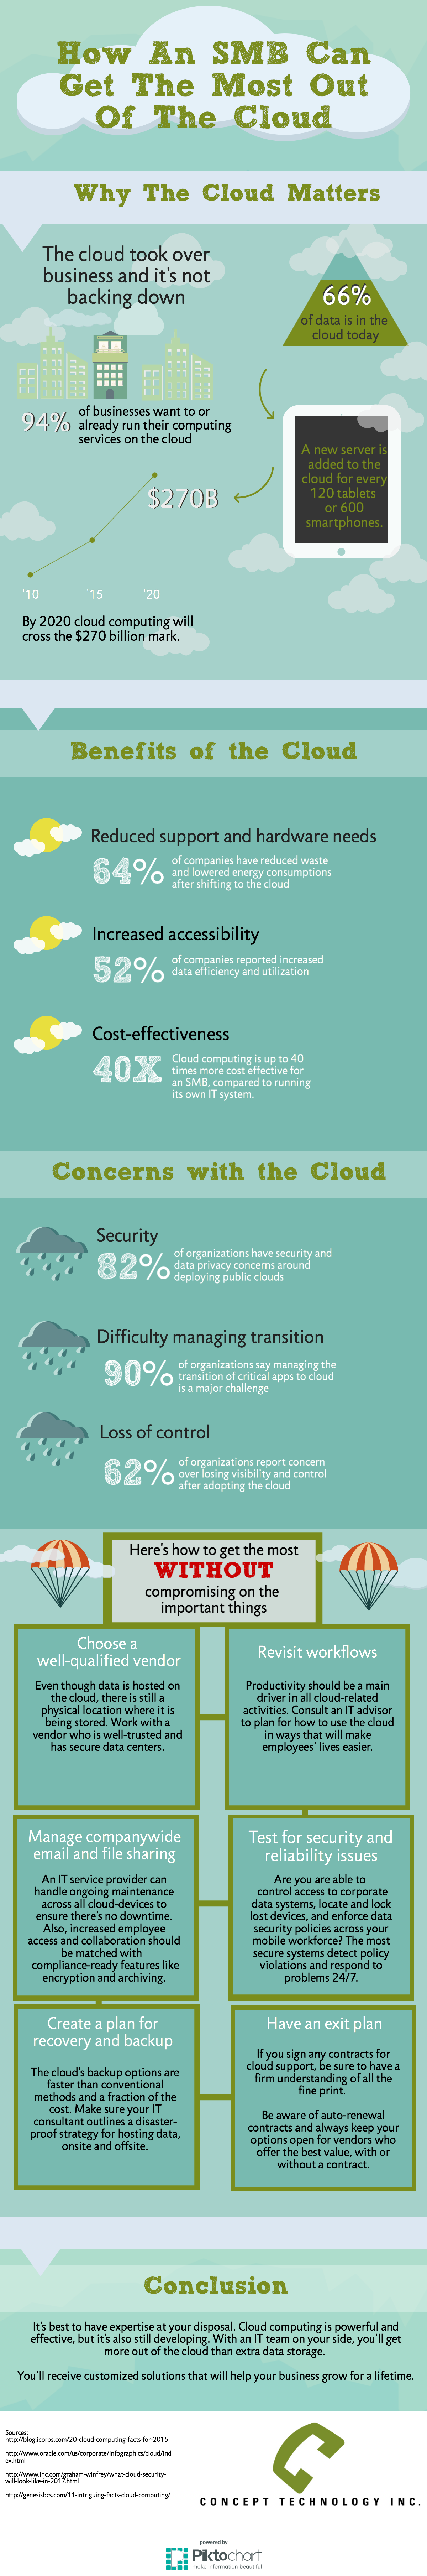 get-the-most-out-of-the-cloud-infographic